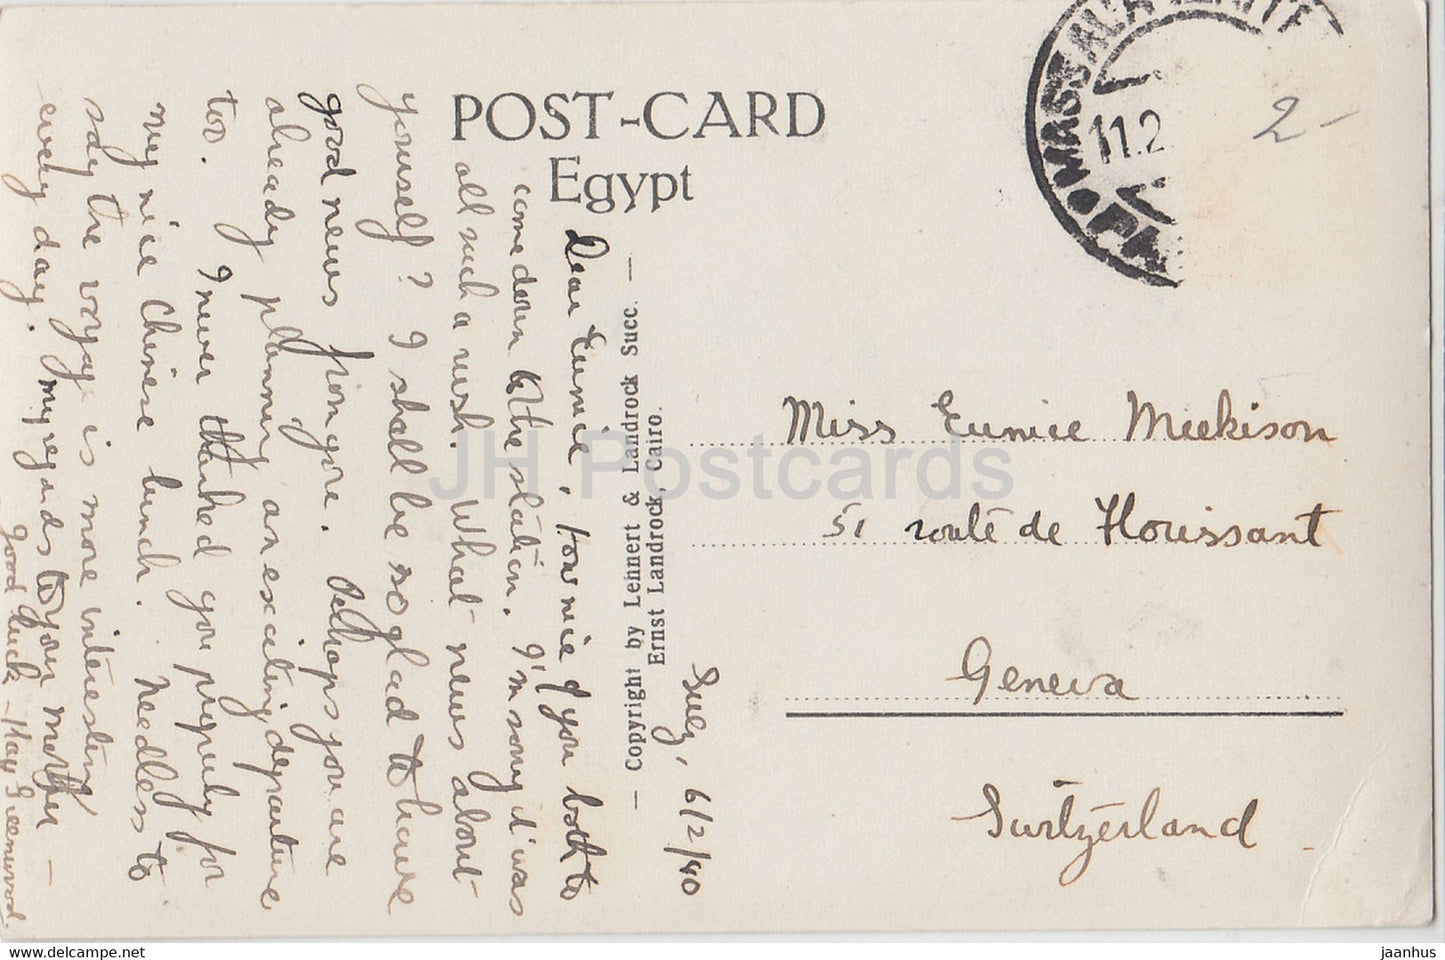 Cairo - The Chefren Pyramid - camel - ancient worlds - 171 - old postcard - 1940 - Egypt - used